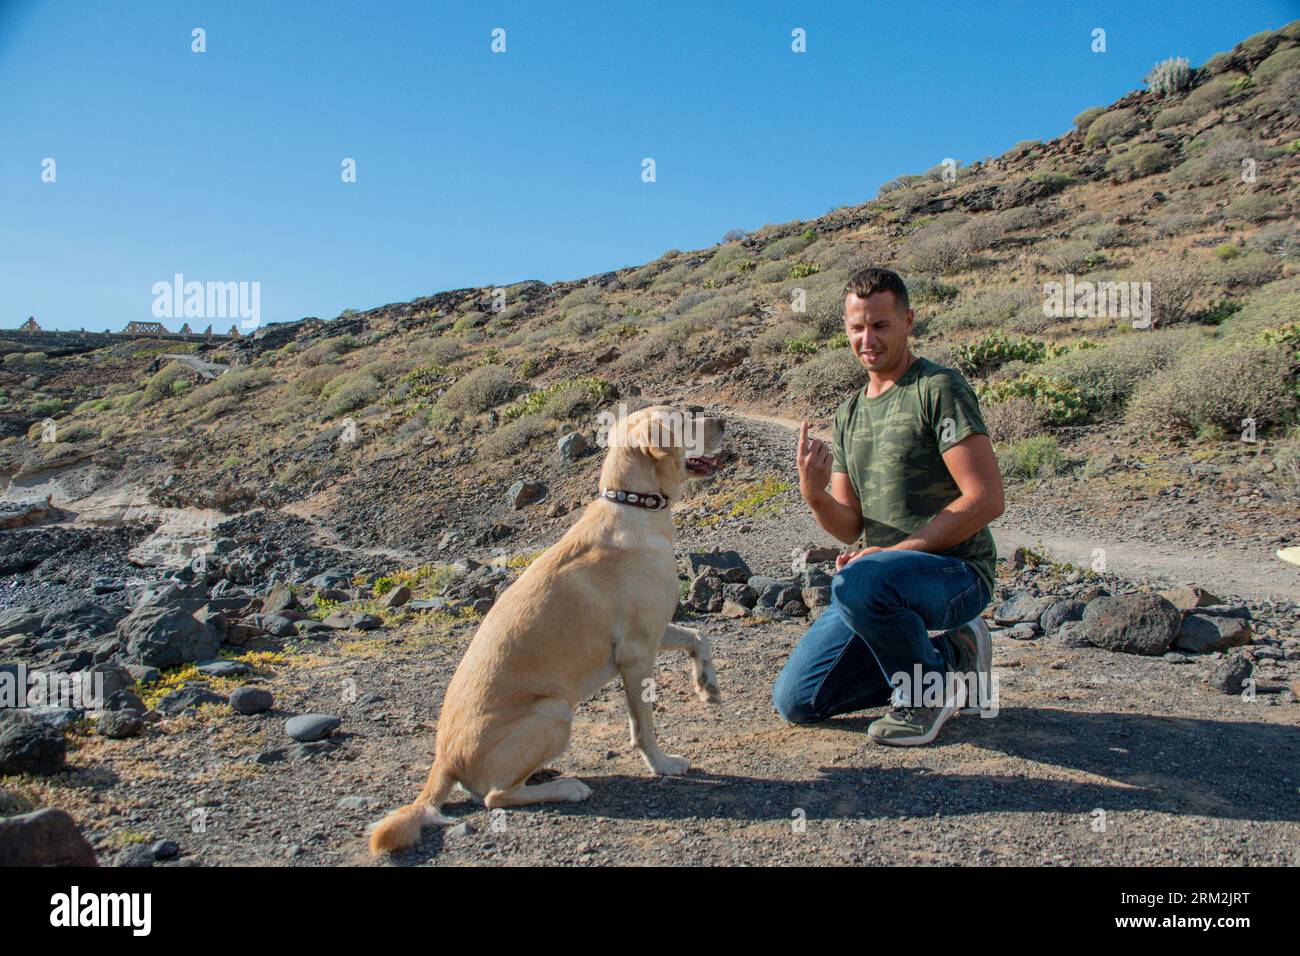 Labrador dog raises its paw obediently to the commands of its canine trainer Stock Photo